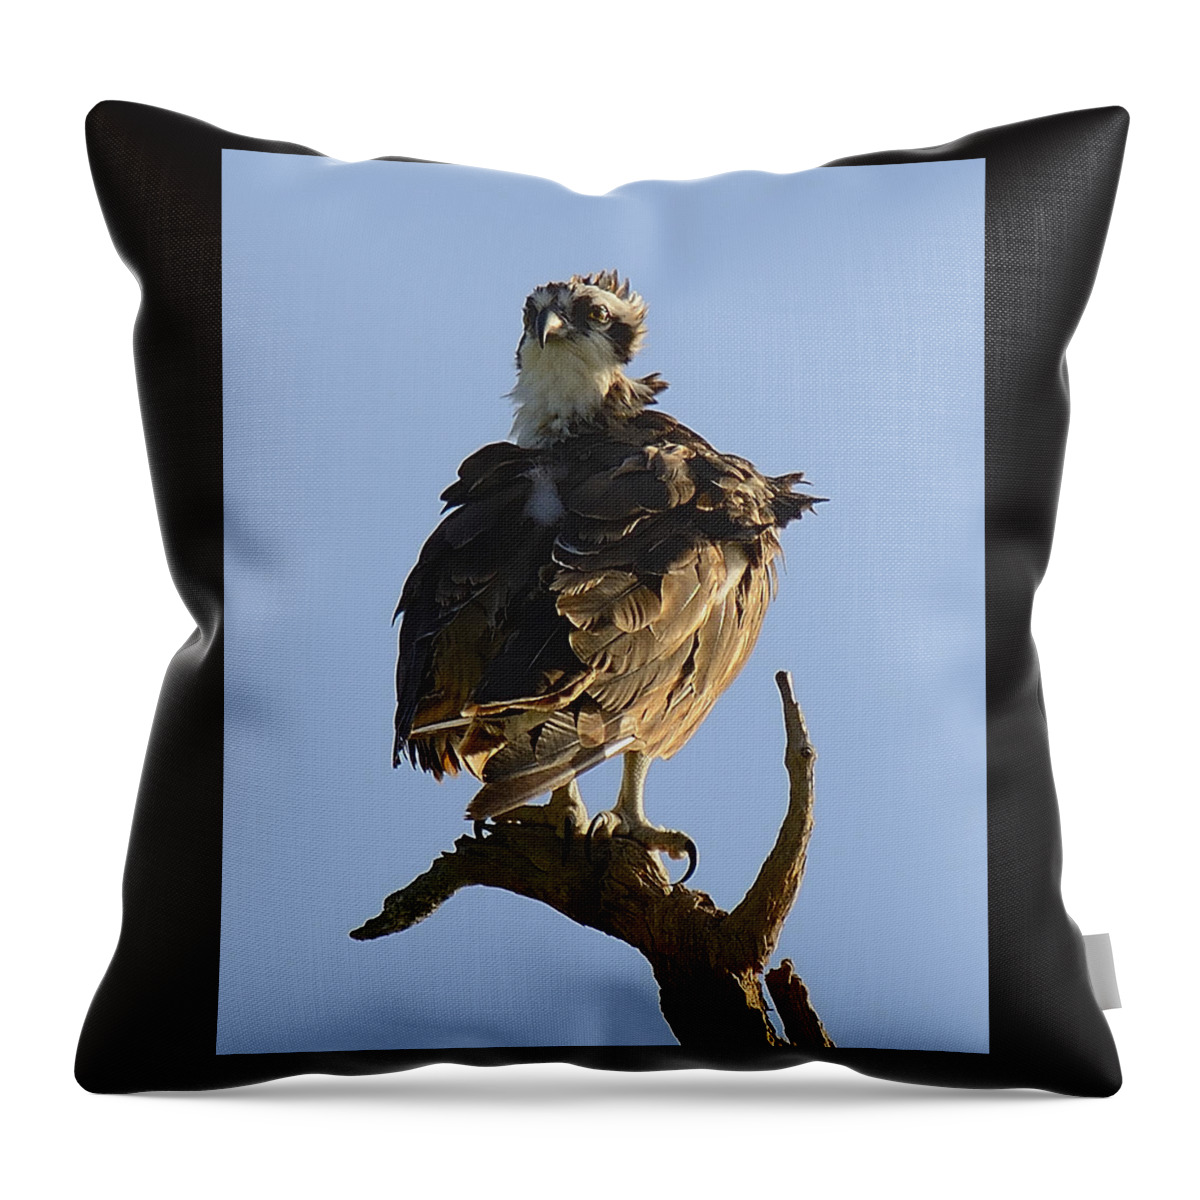 Wildlife Throw Pillow featuring the photograph Osprey by Alison Belsan Horton